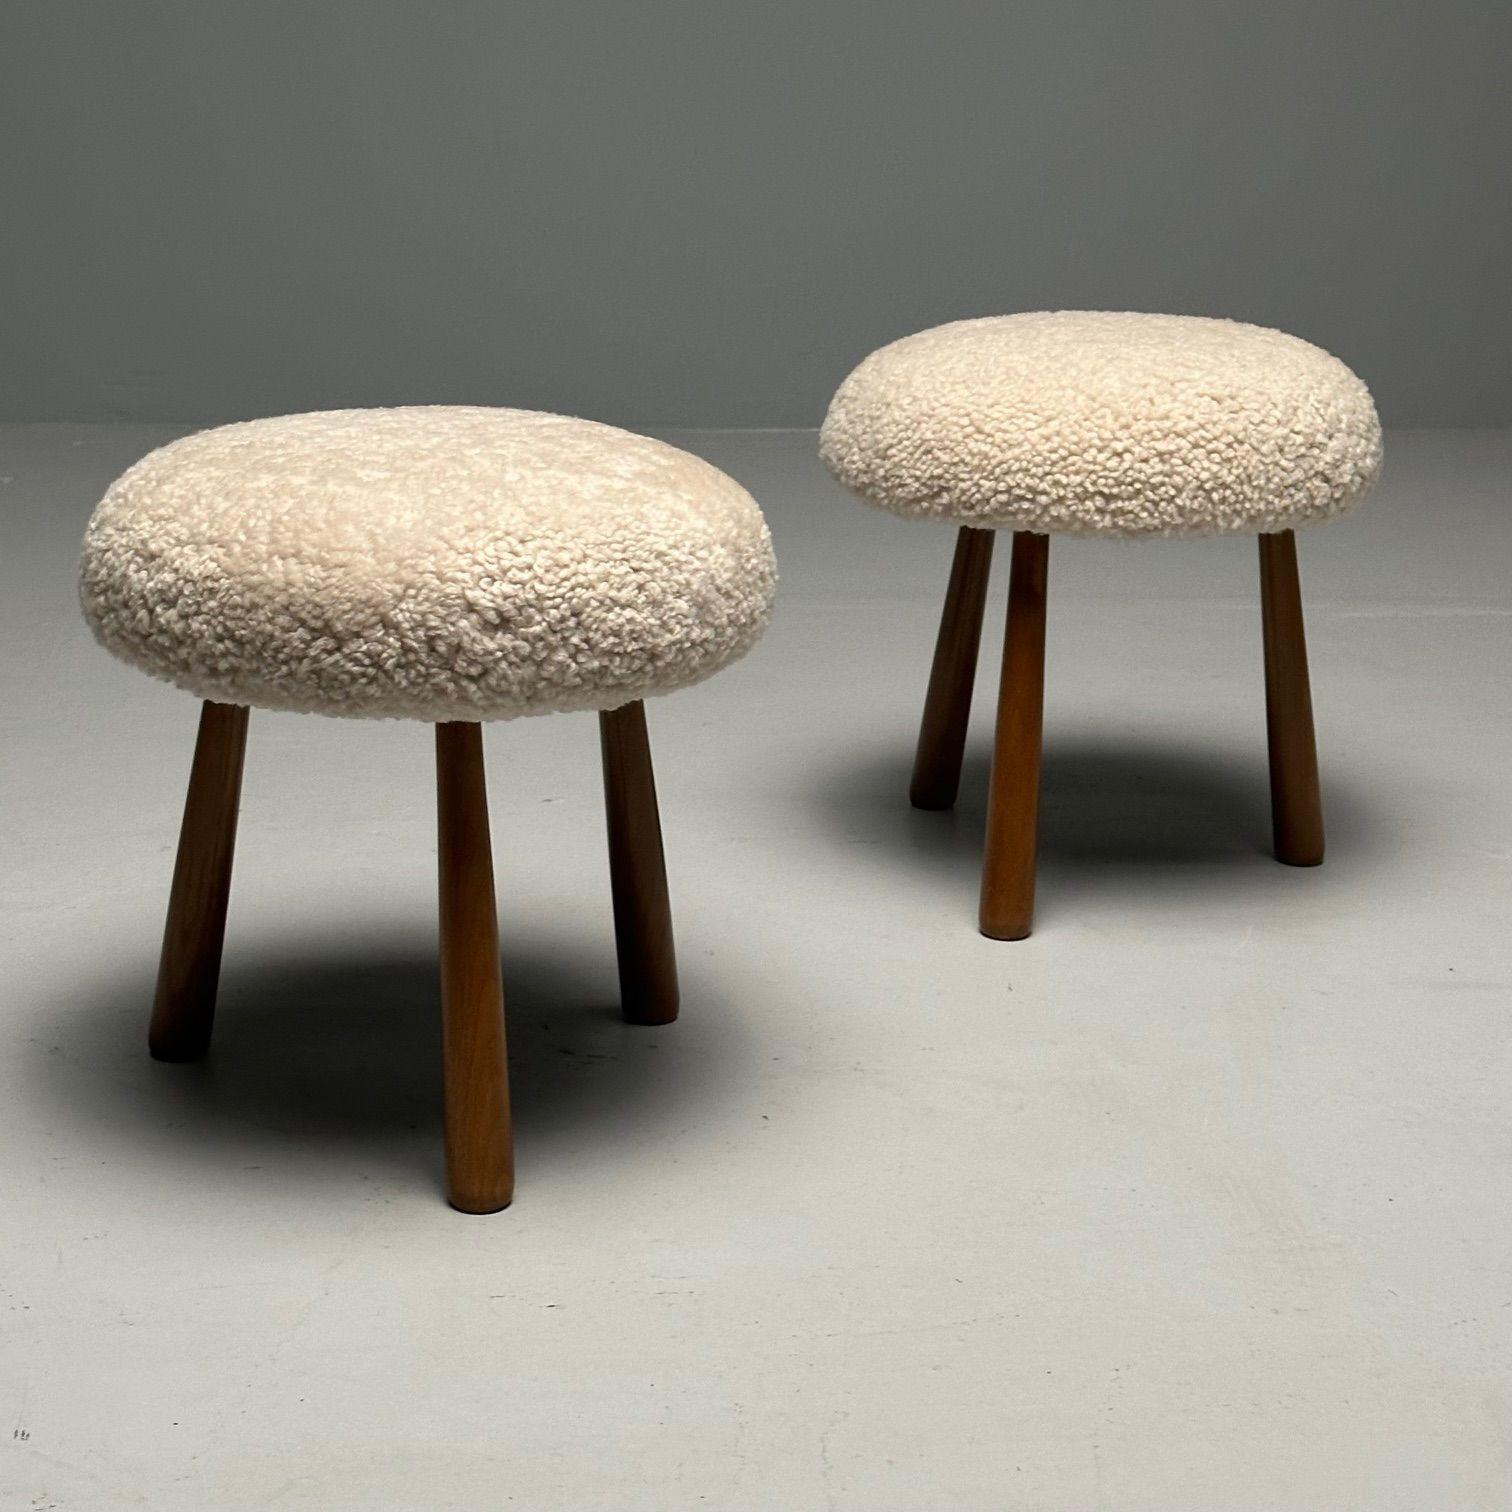 Pair Contemporary Sheepskin Stools / Ottomans, Swedish Modern Style, Shearling For Sale 7